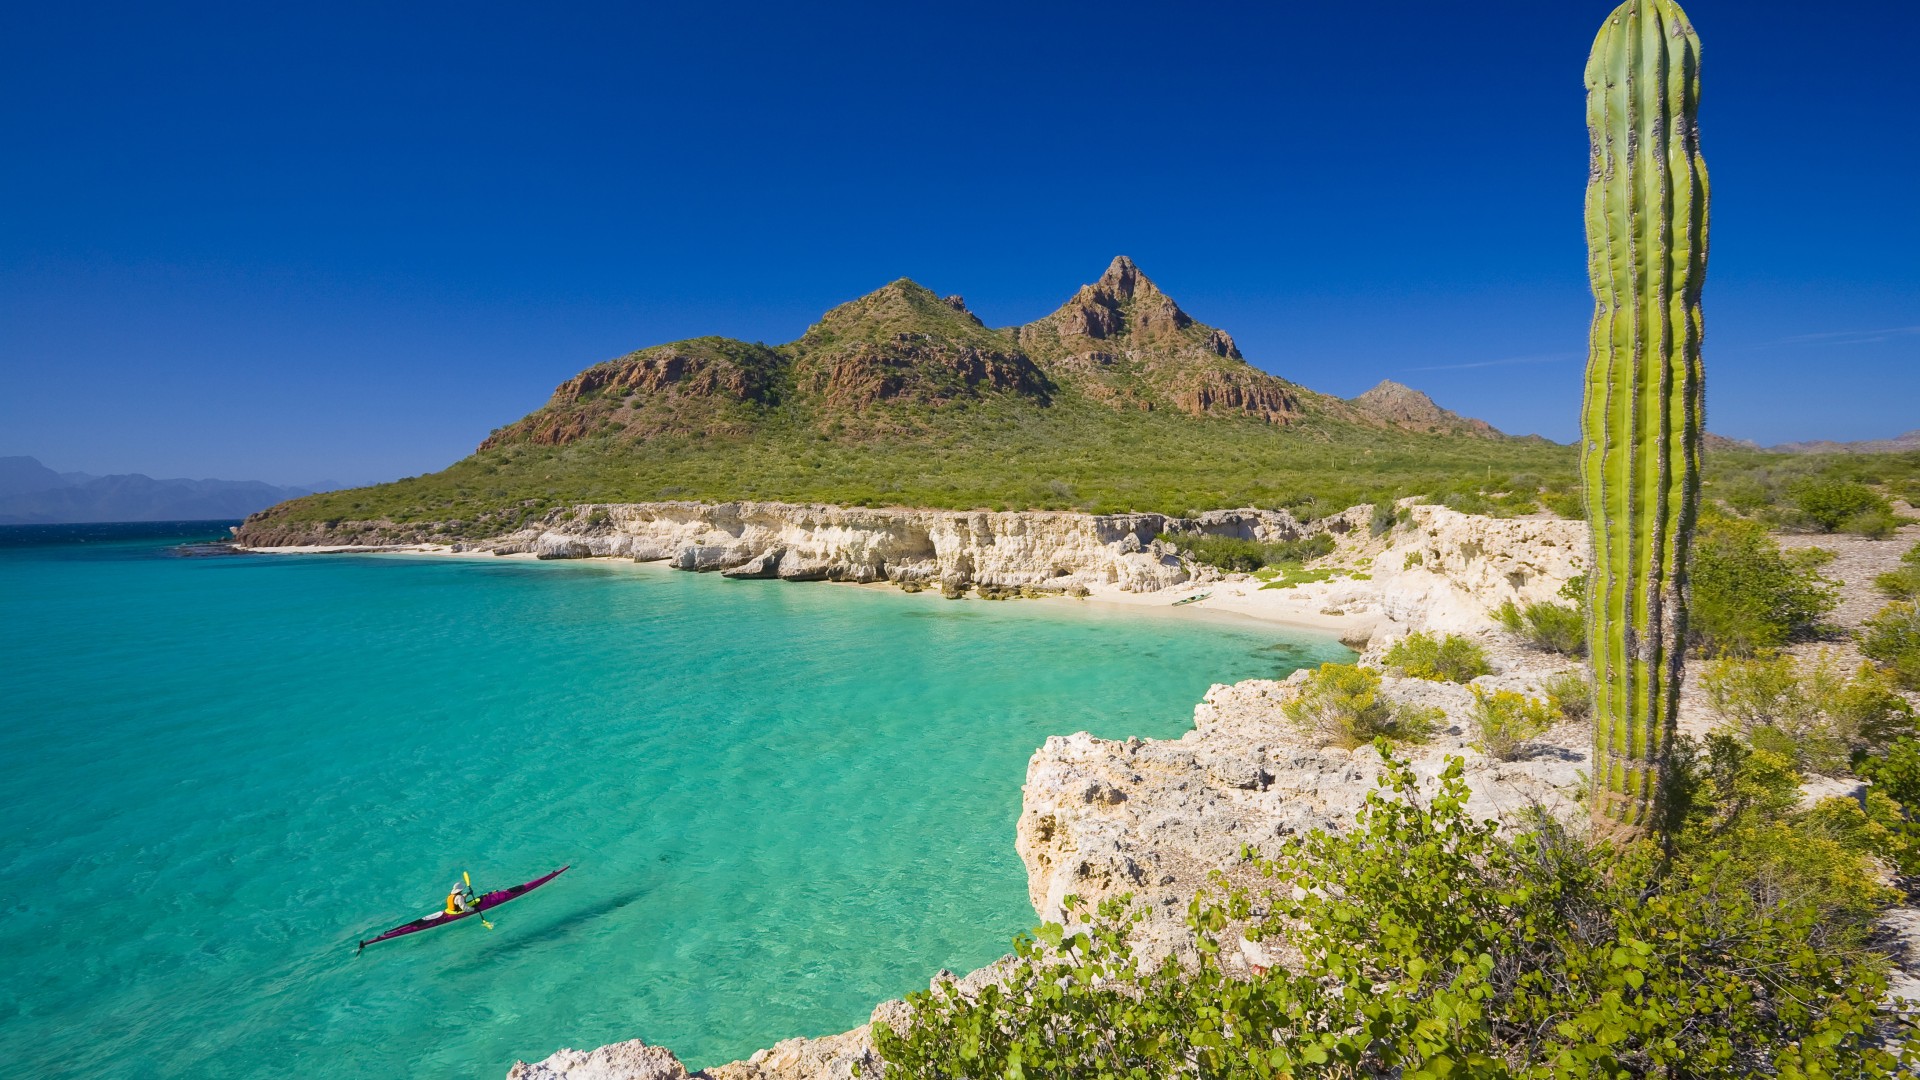 Kayakers paddling around a scenic cove with Carmen Island and cacti in the background on the Sea of Cortez